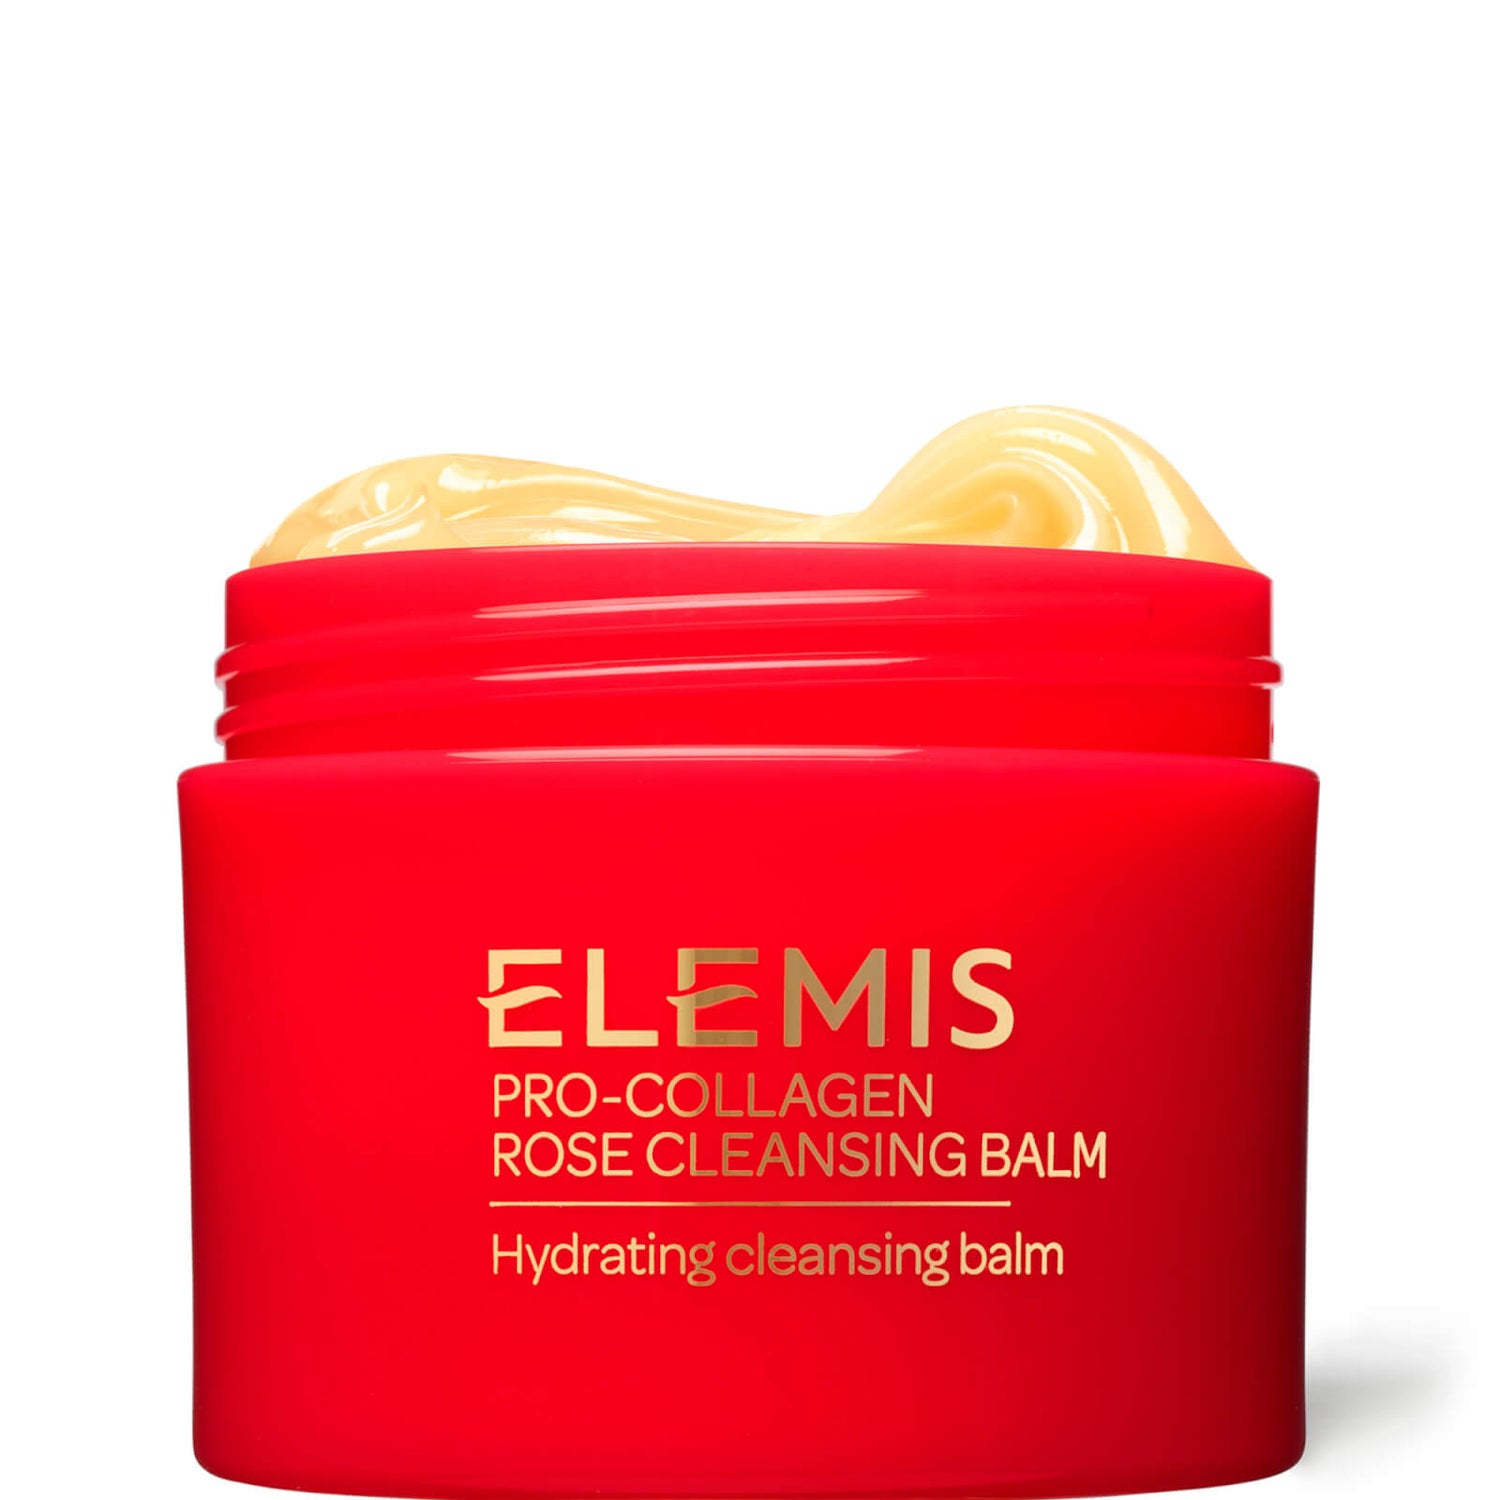 Limited Edition Pro-Collagen Rose Cleansing Balm